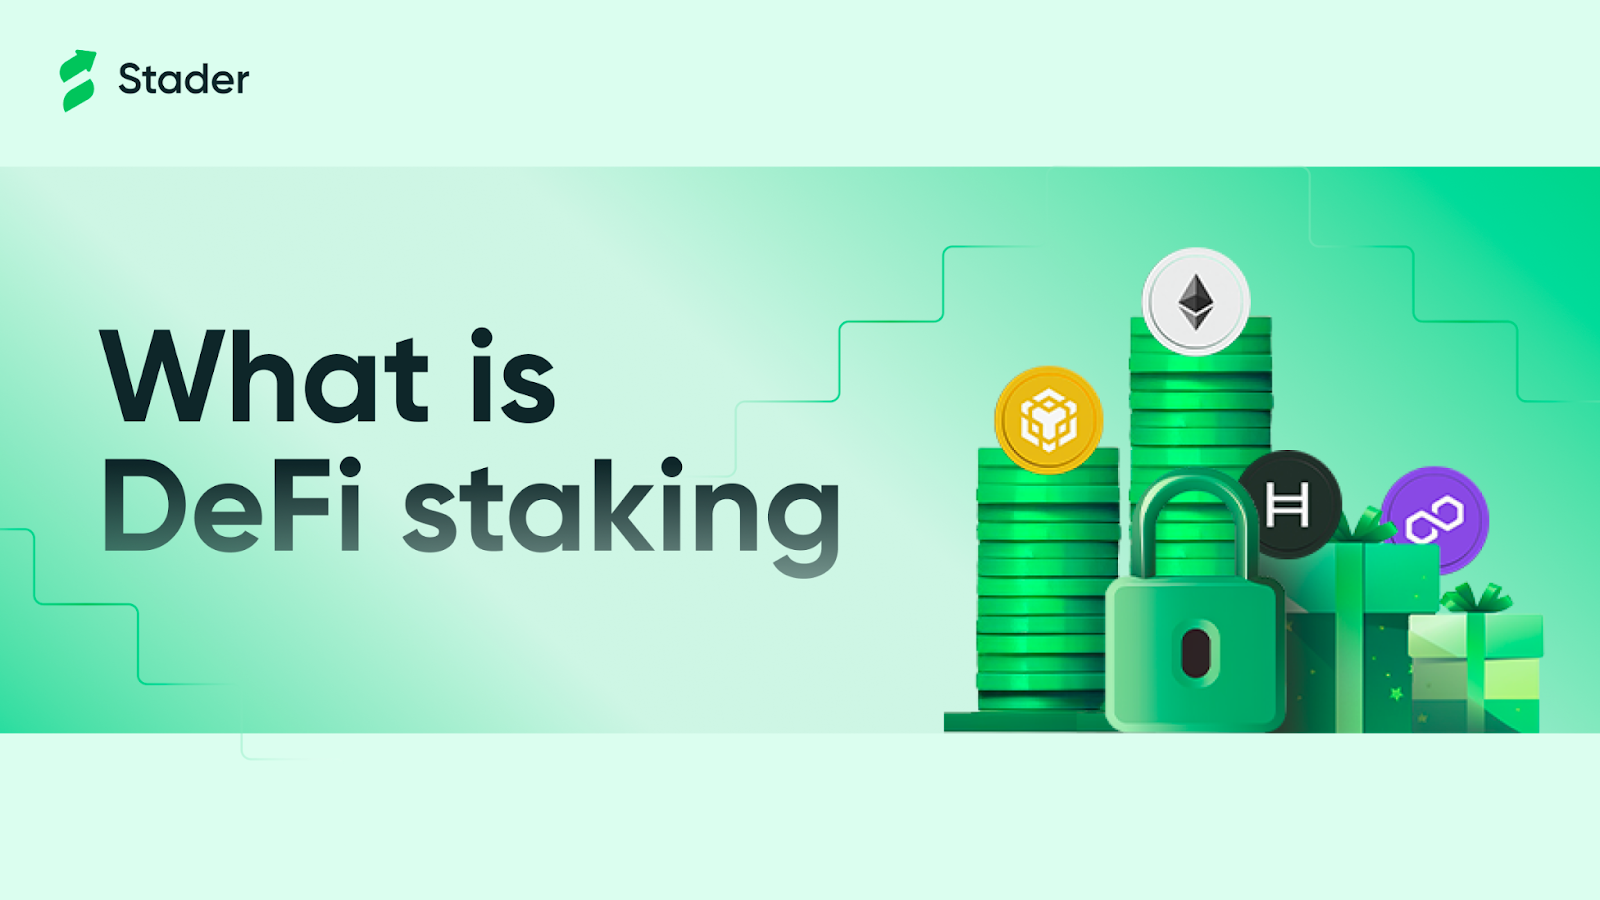 What is DeFi staking?